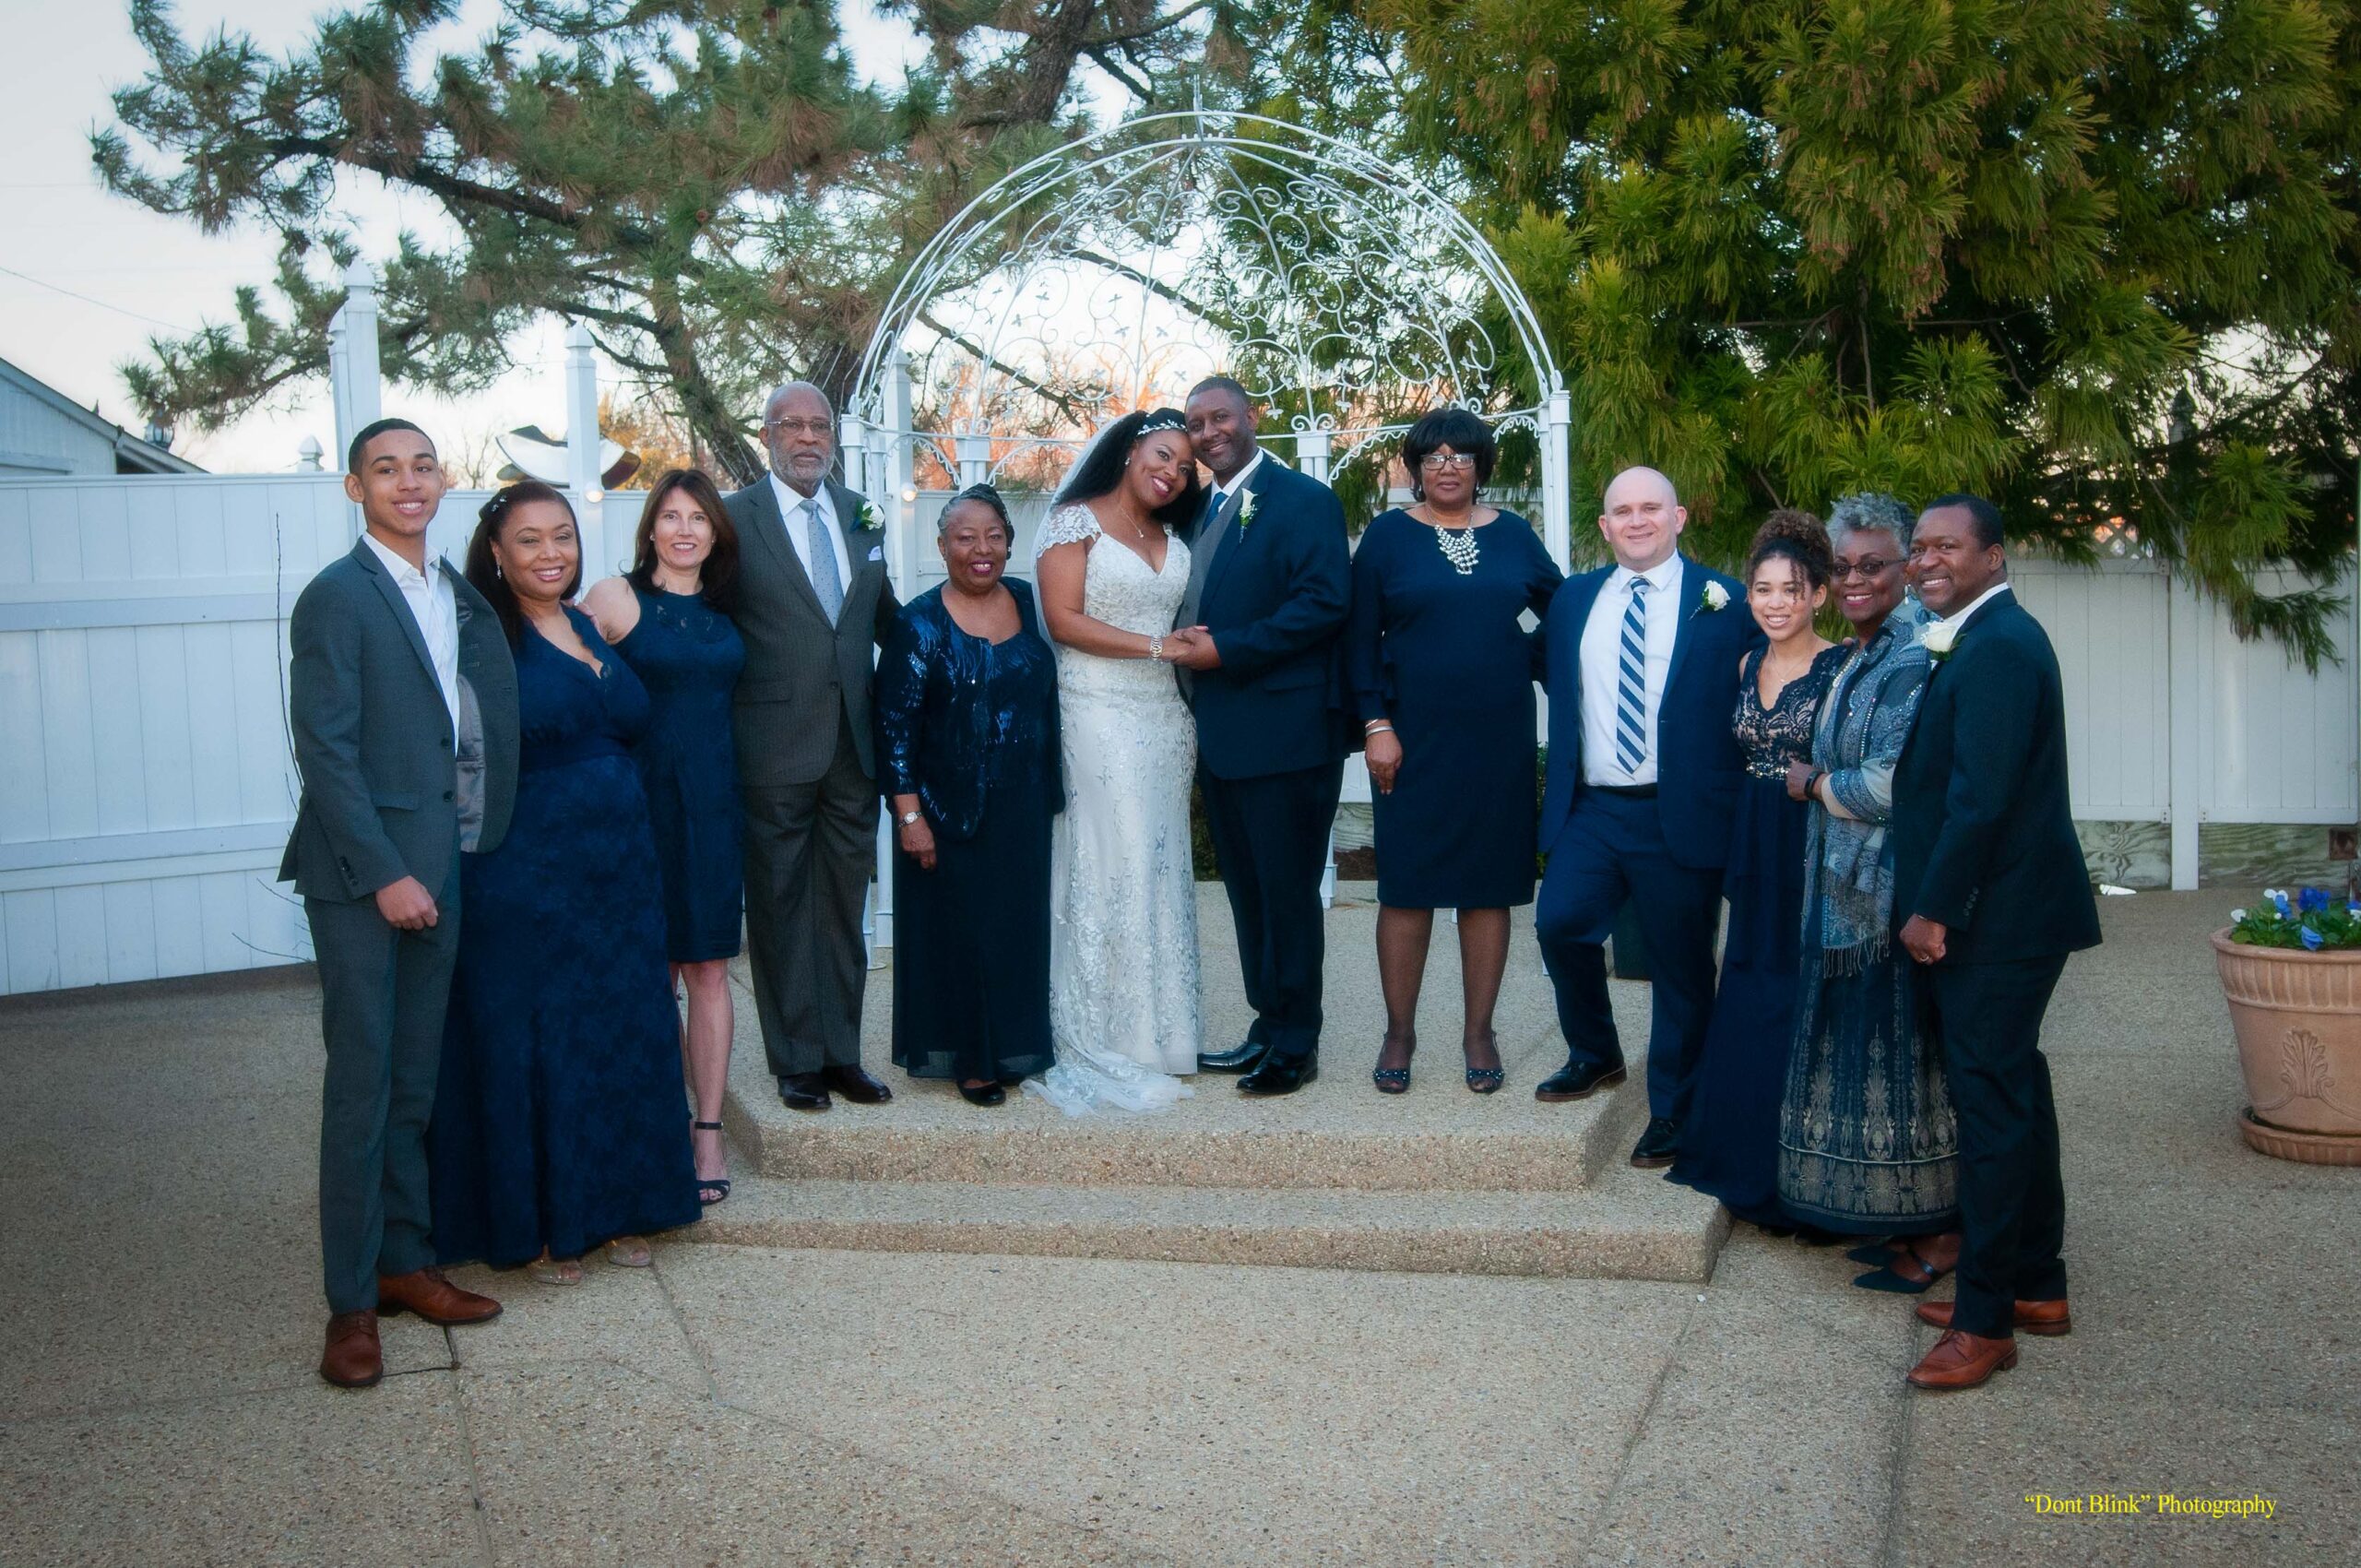 Group from wedding with bridesmaids in blue